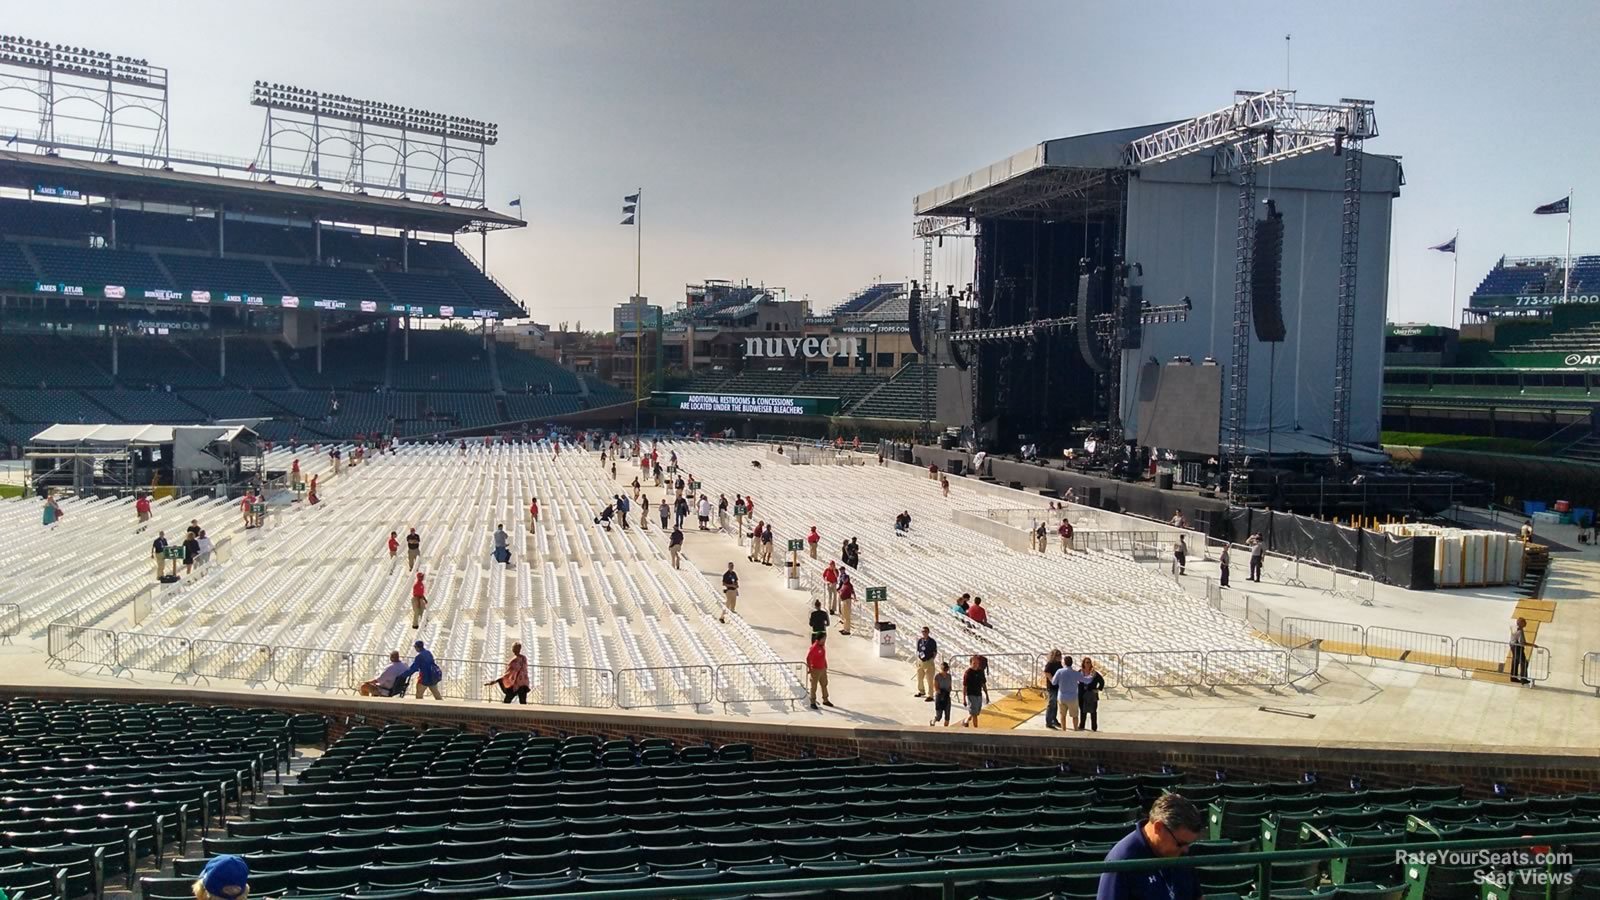 section 232, row 7 seat view  for concert - wrigley field